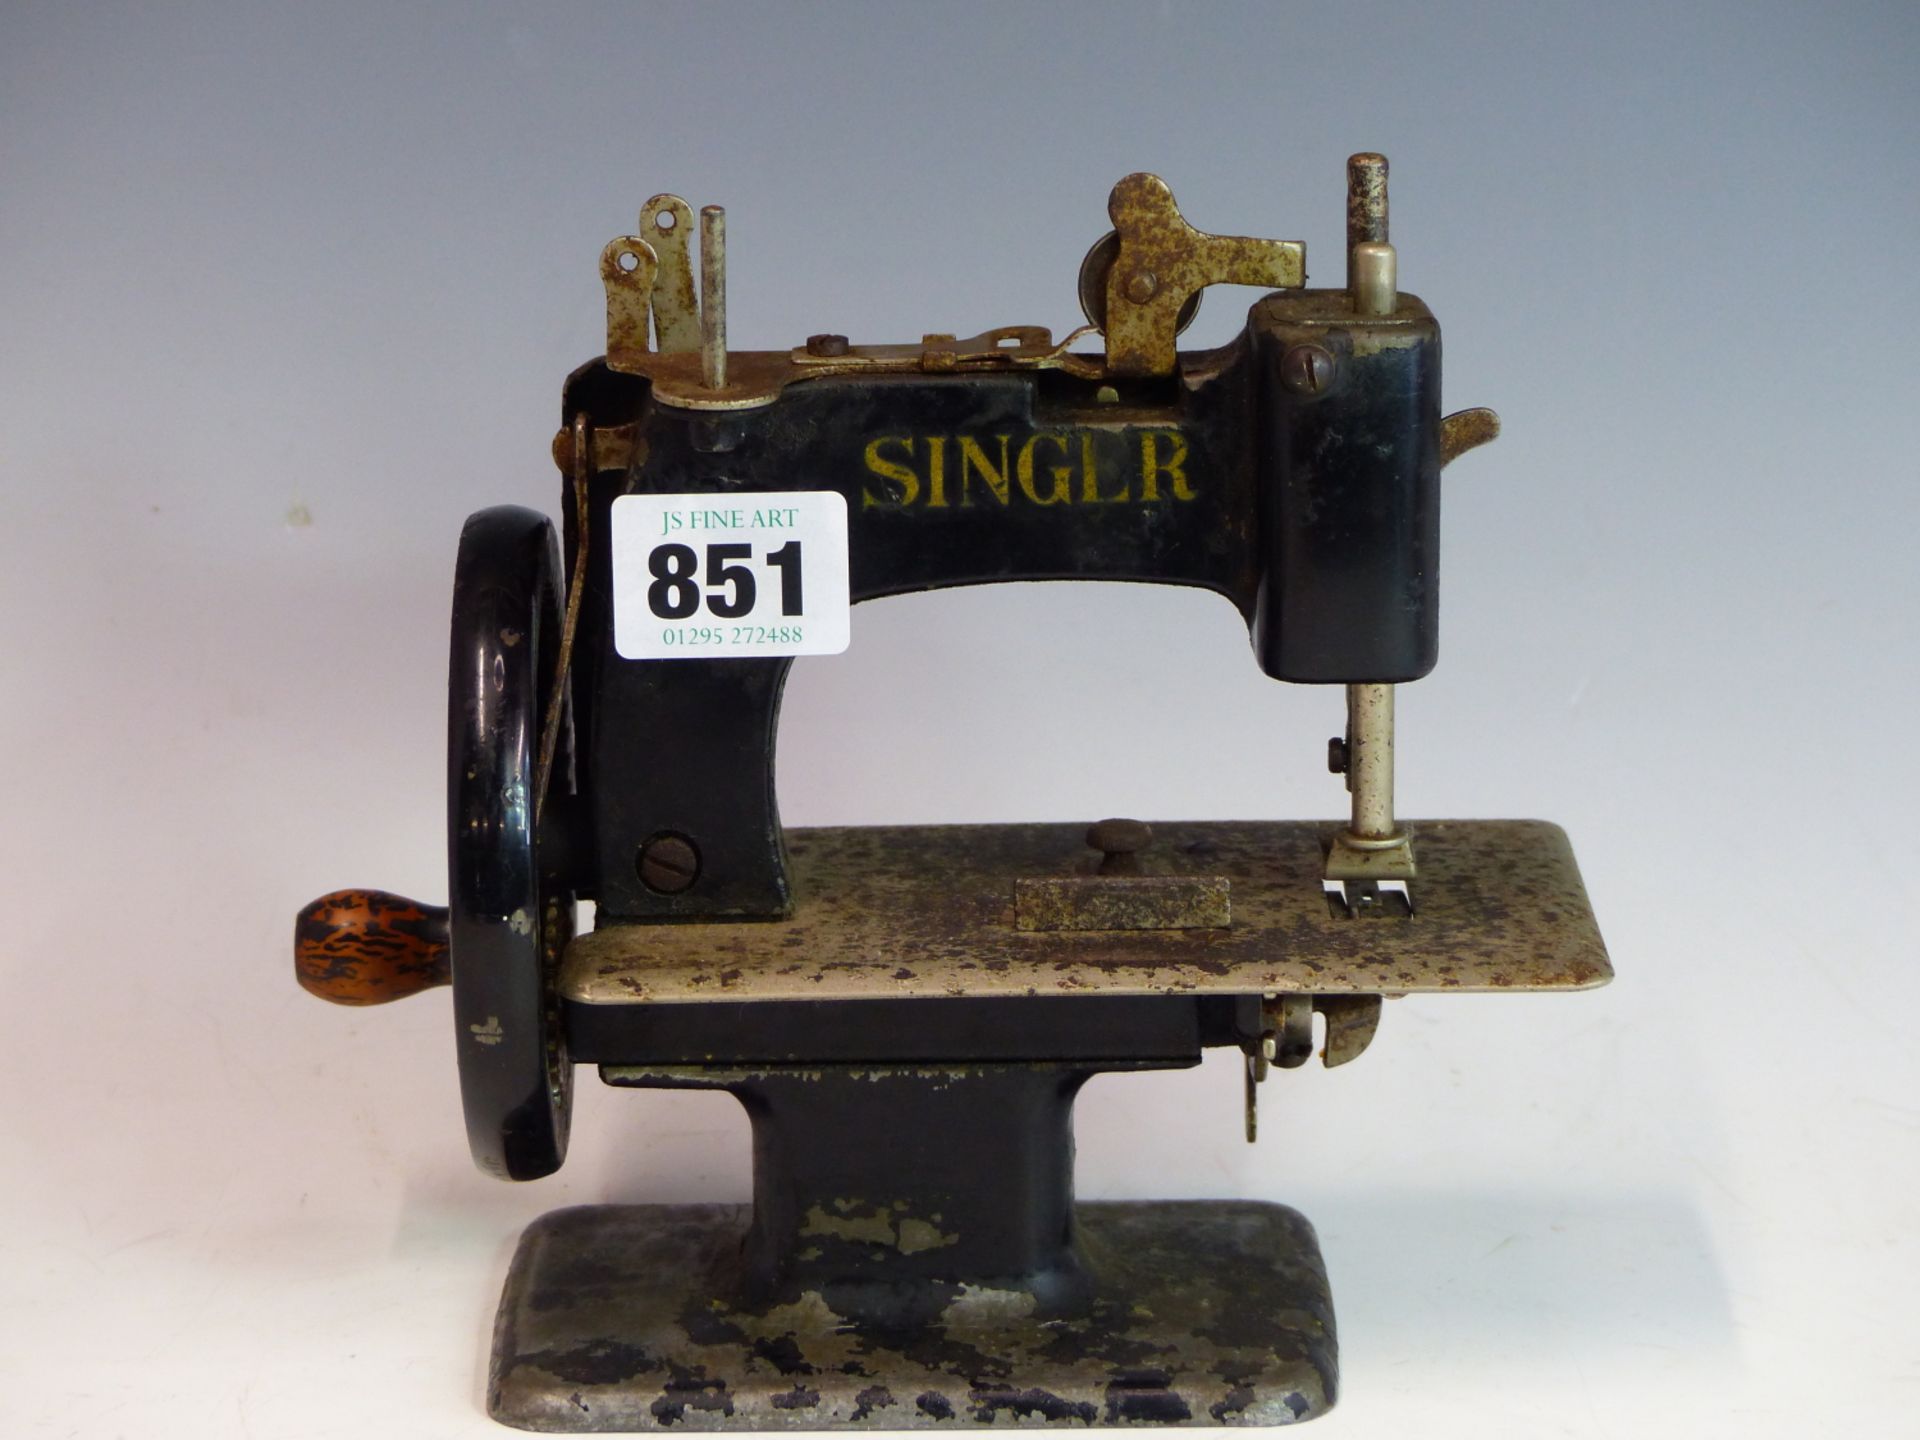 A VINTAGE SINGER MINIATURE SEWING MACHINE WITH ALLOY BODY. - Image 3 of 4